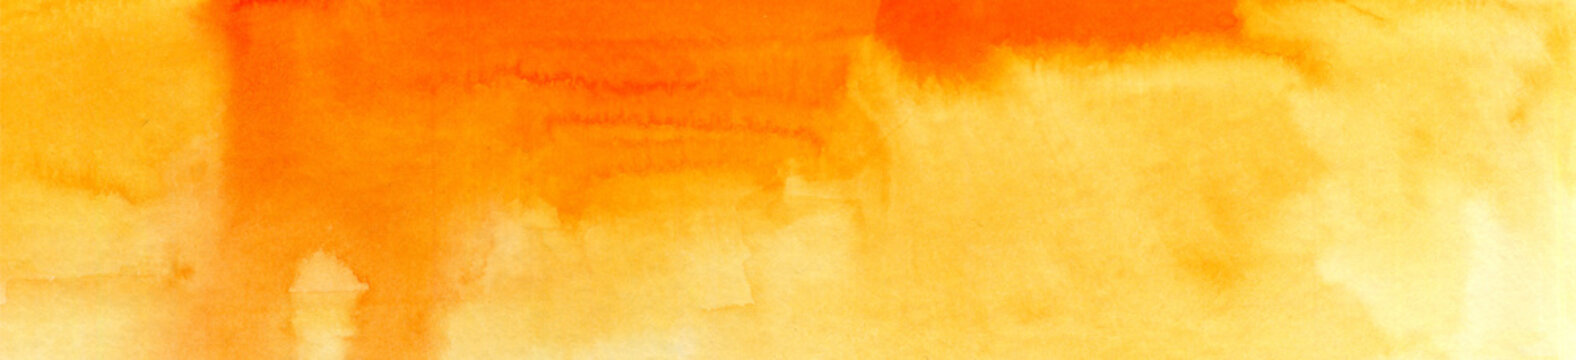 horizontal watercolor background with soft transitions. Autumn orange warm watercolor background